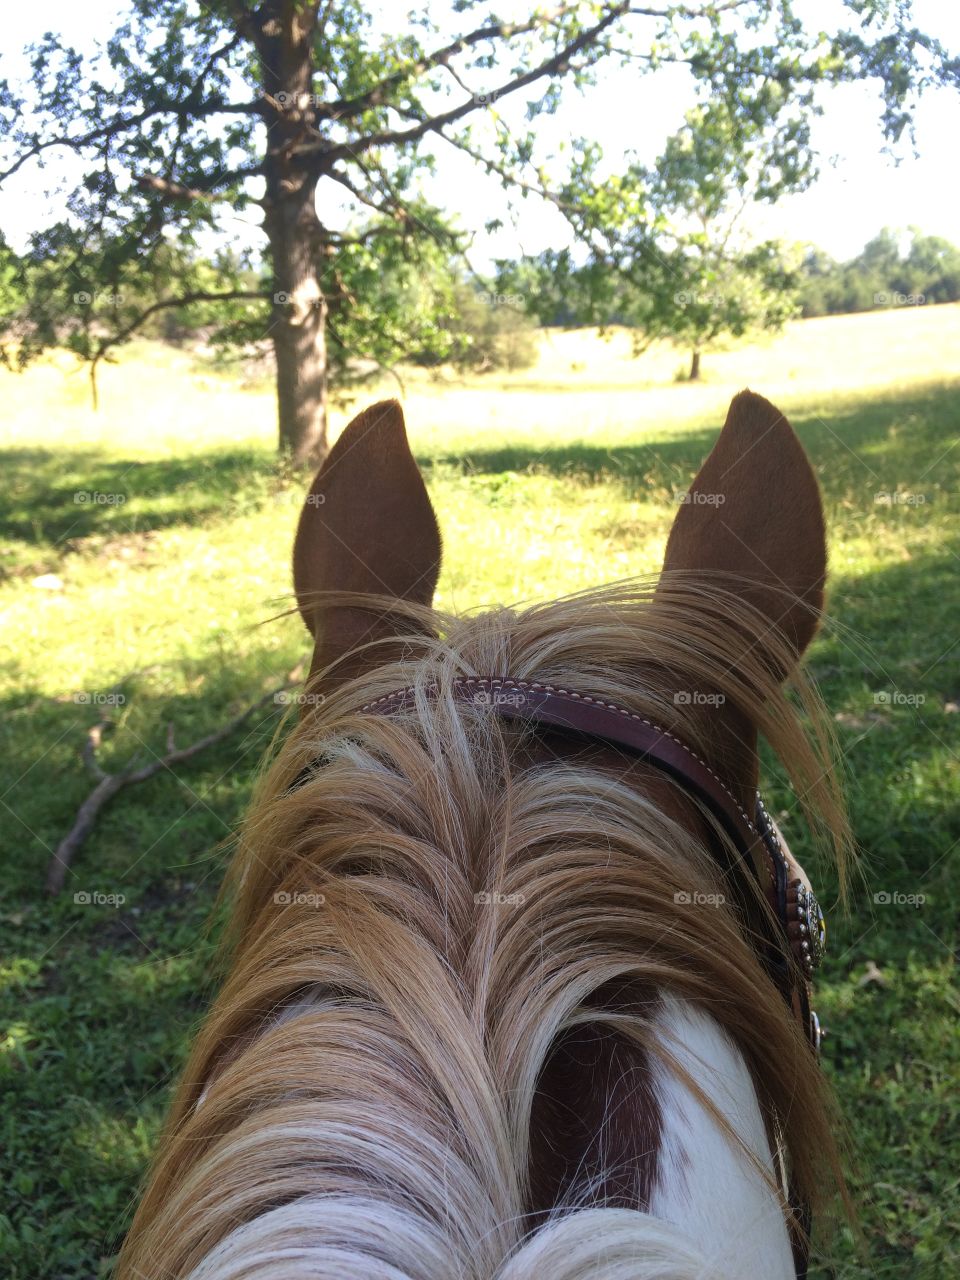 Life is better when seen through the ears of a horse 